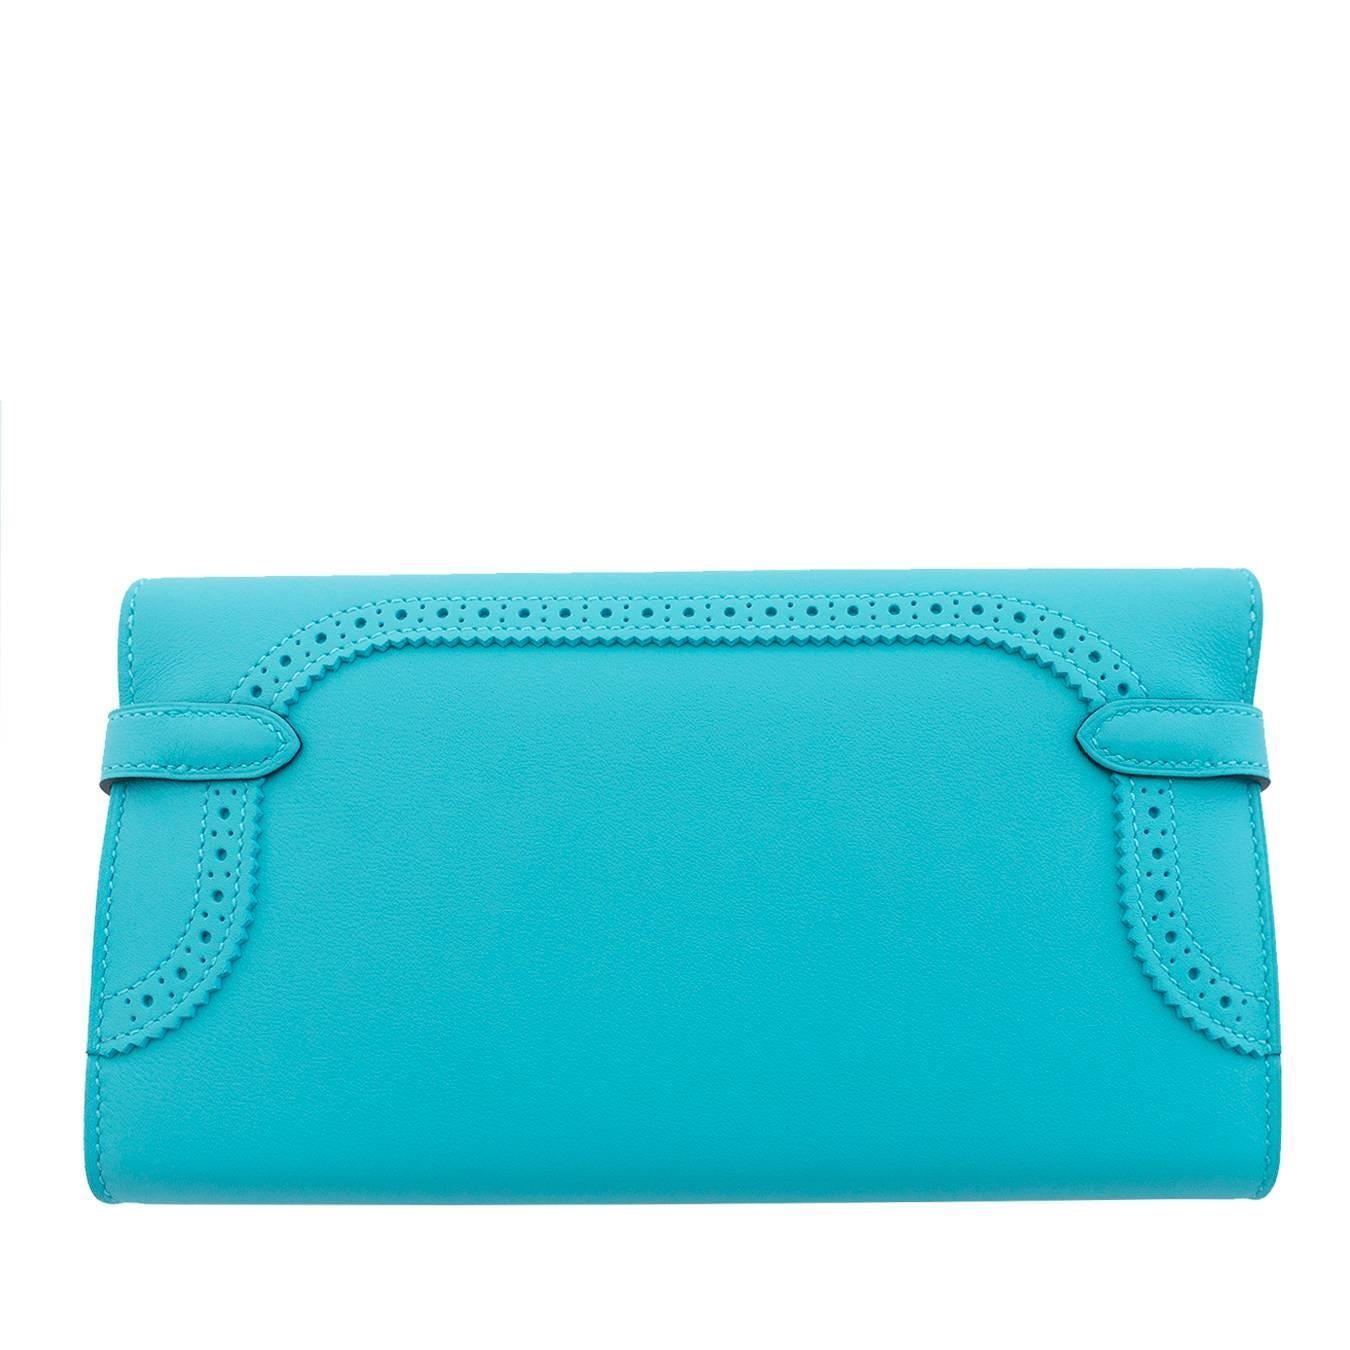 Store fresh.  Pristine condition.
Perfect gift!  Comes full set with Hermes box and ribbon.
Extremely limited edition kelly wallet in Ghillies design featuring spectator trim.
Set with palladium hardware against Blue Atoll, a delicately pretty